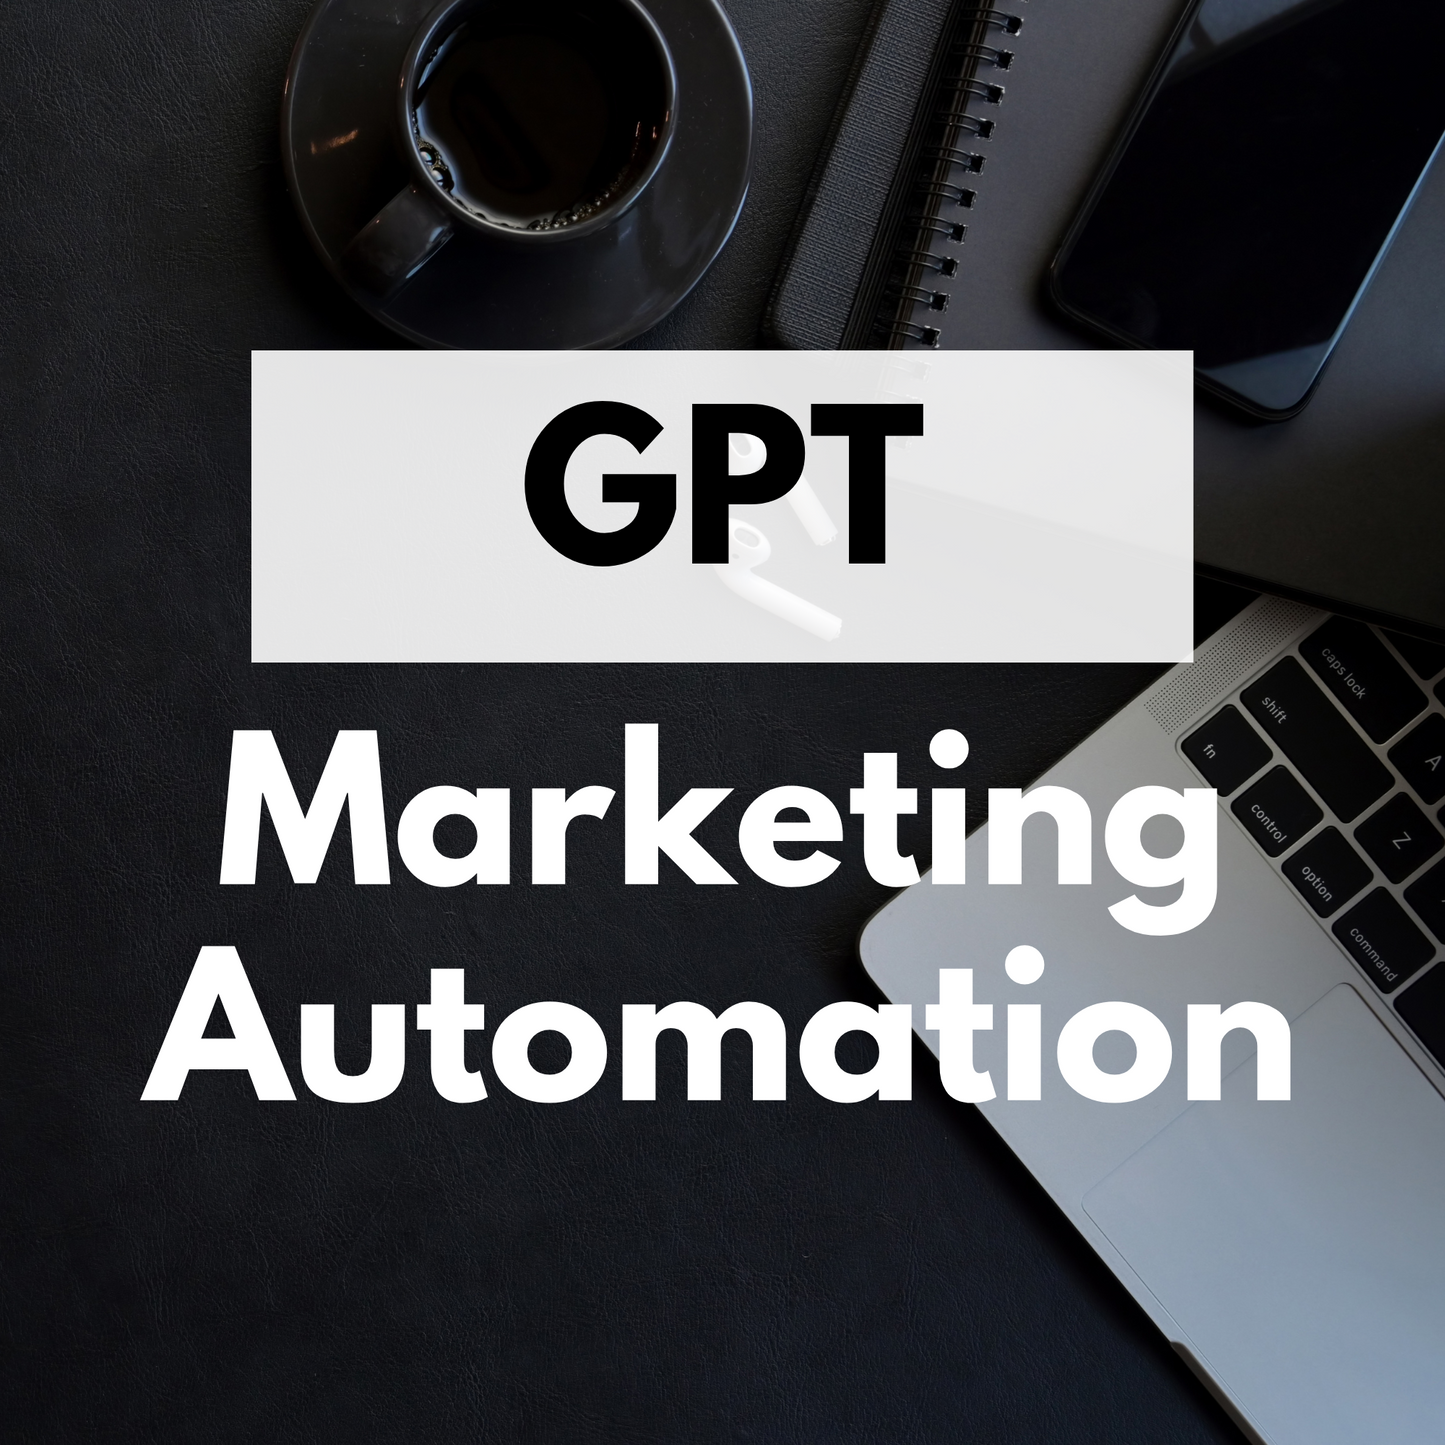 email writer, marketing automation, gpt, chat gpt, chat gpt 4, gpt 4, gpt 3, gpt zero, auto gpt, gpt chat, chat bot, gpt online, seo for etsy, etsy, instant download, digital download, seo for website, chat ai, chat openai, chatbot gpt, chat bot ai, chat bot 